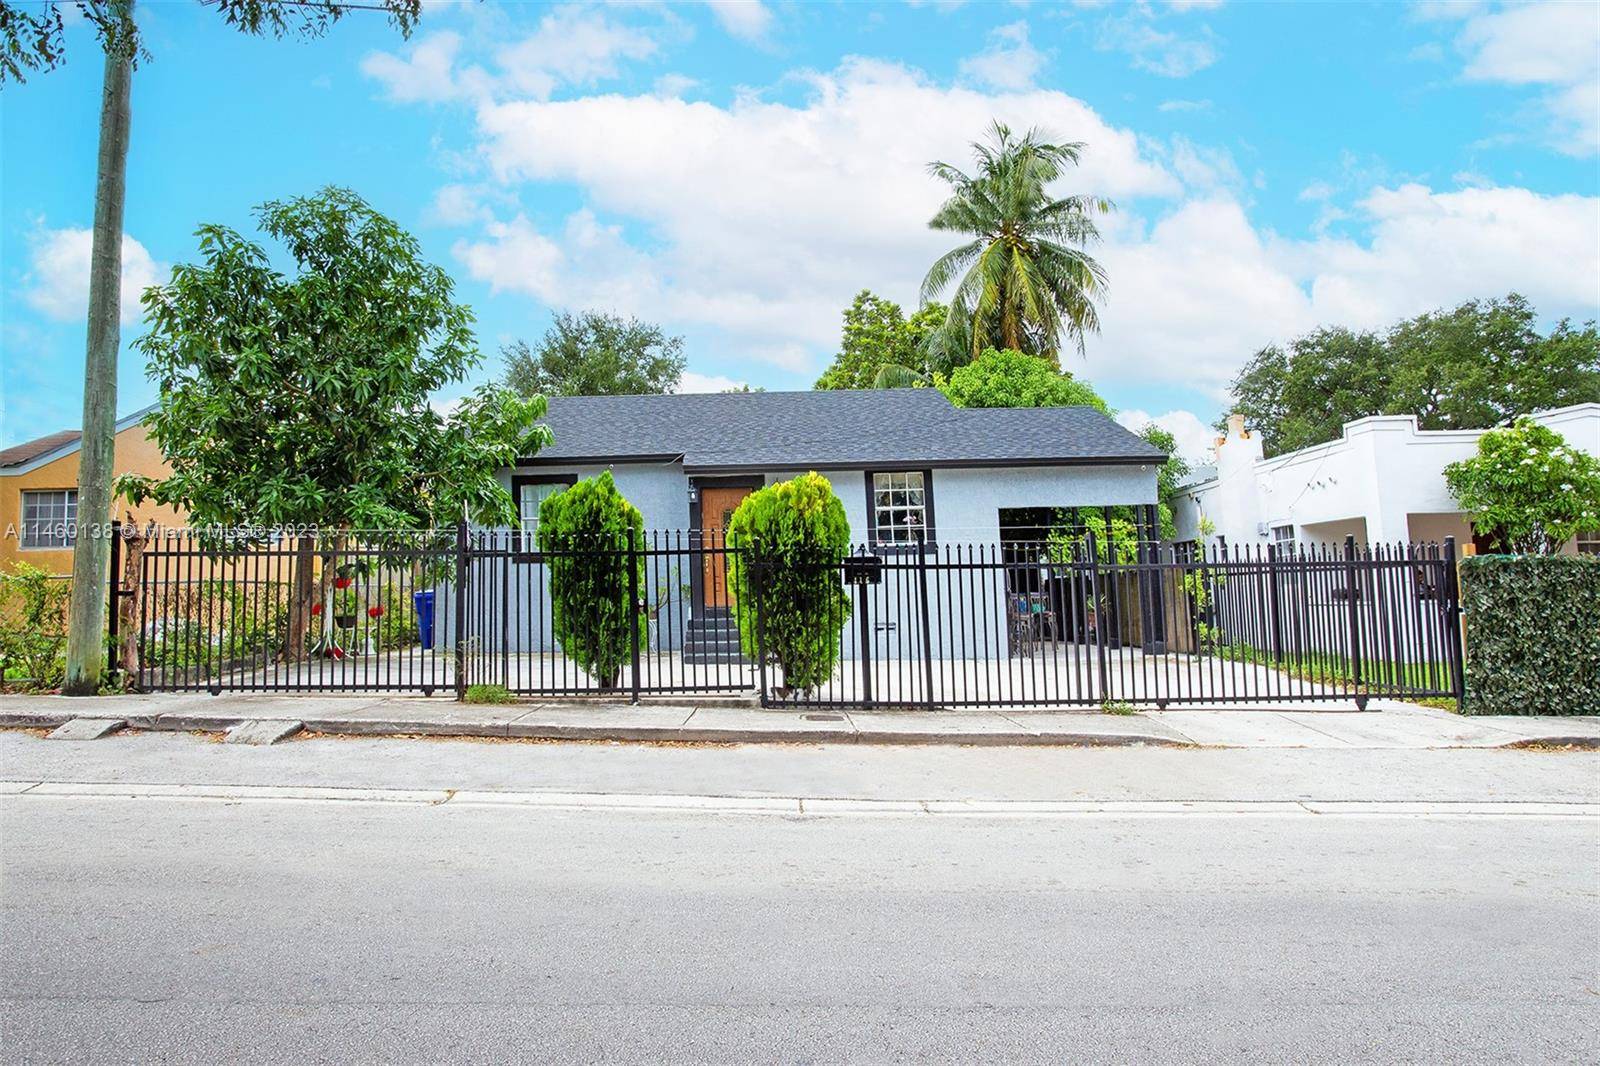 Incredible single family home and a central Miami location with proximity to all major highways open coming Marlins stadium area, this home offers rental income plus additional income from Inlaw ...